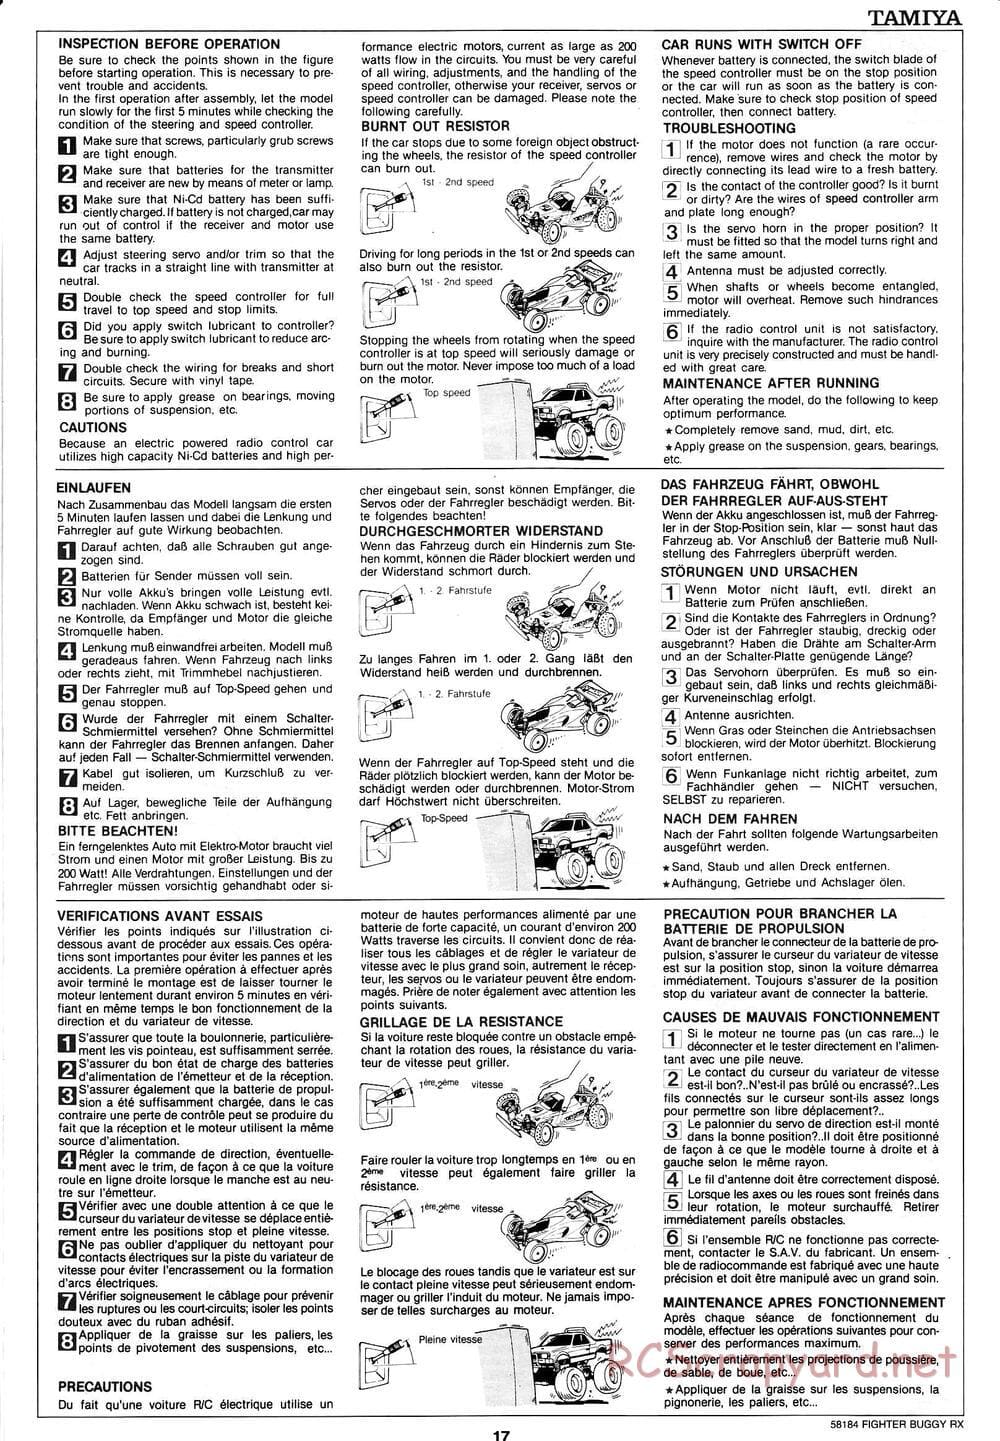 Tamiya - Fighter Buggy RX Chassis - Manual - Page 17